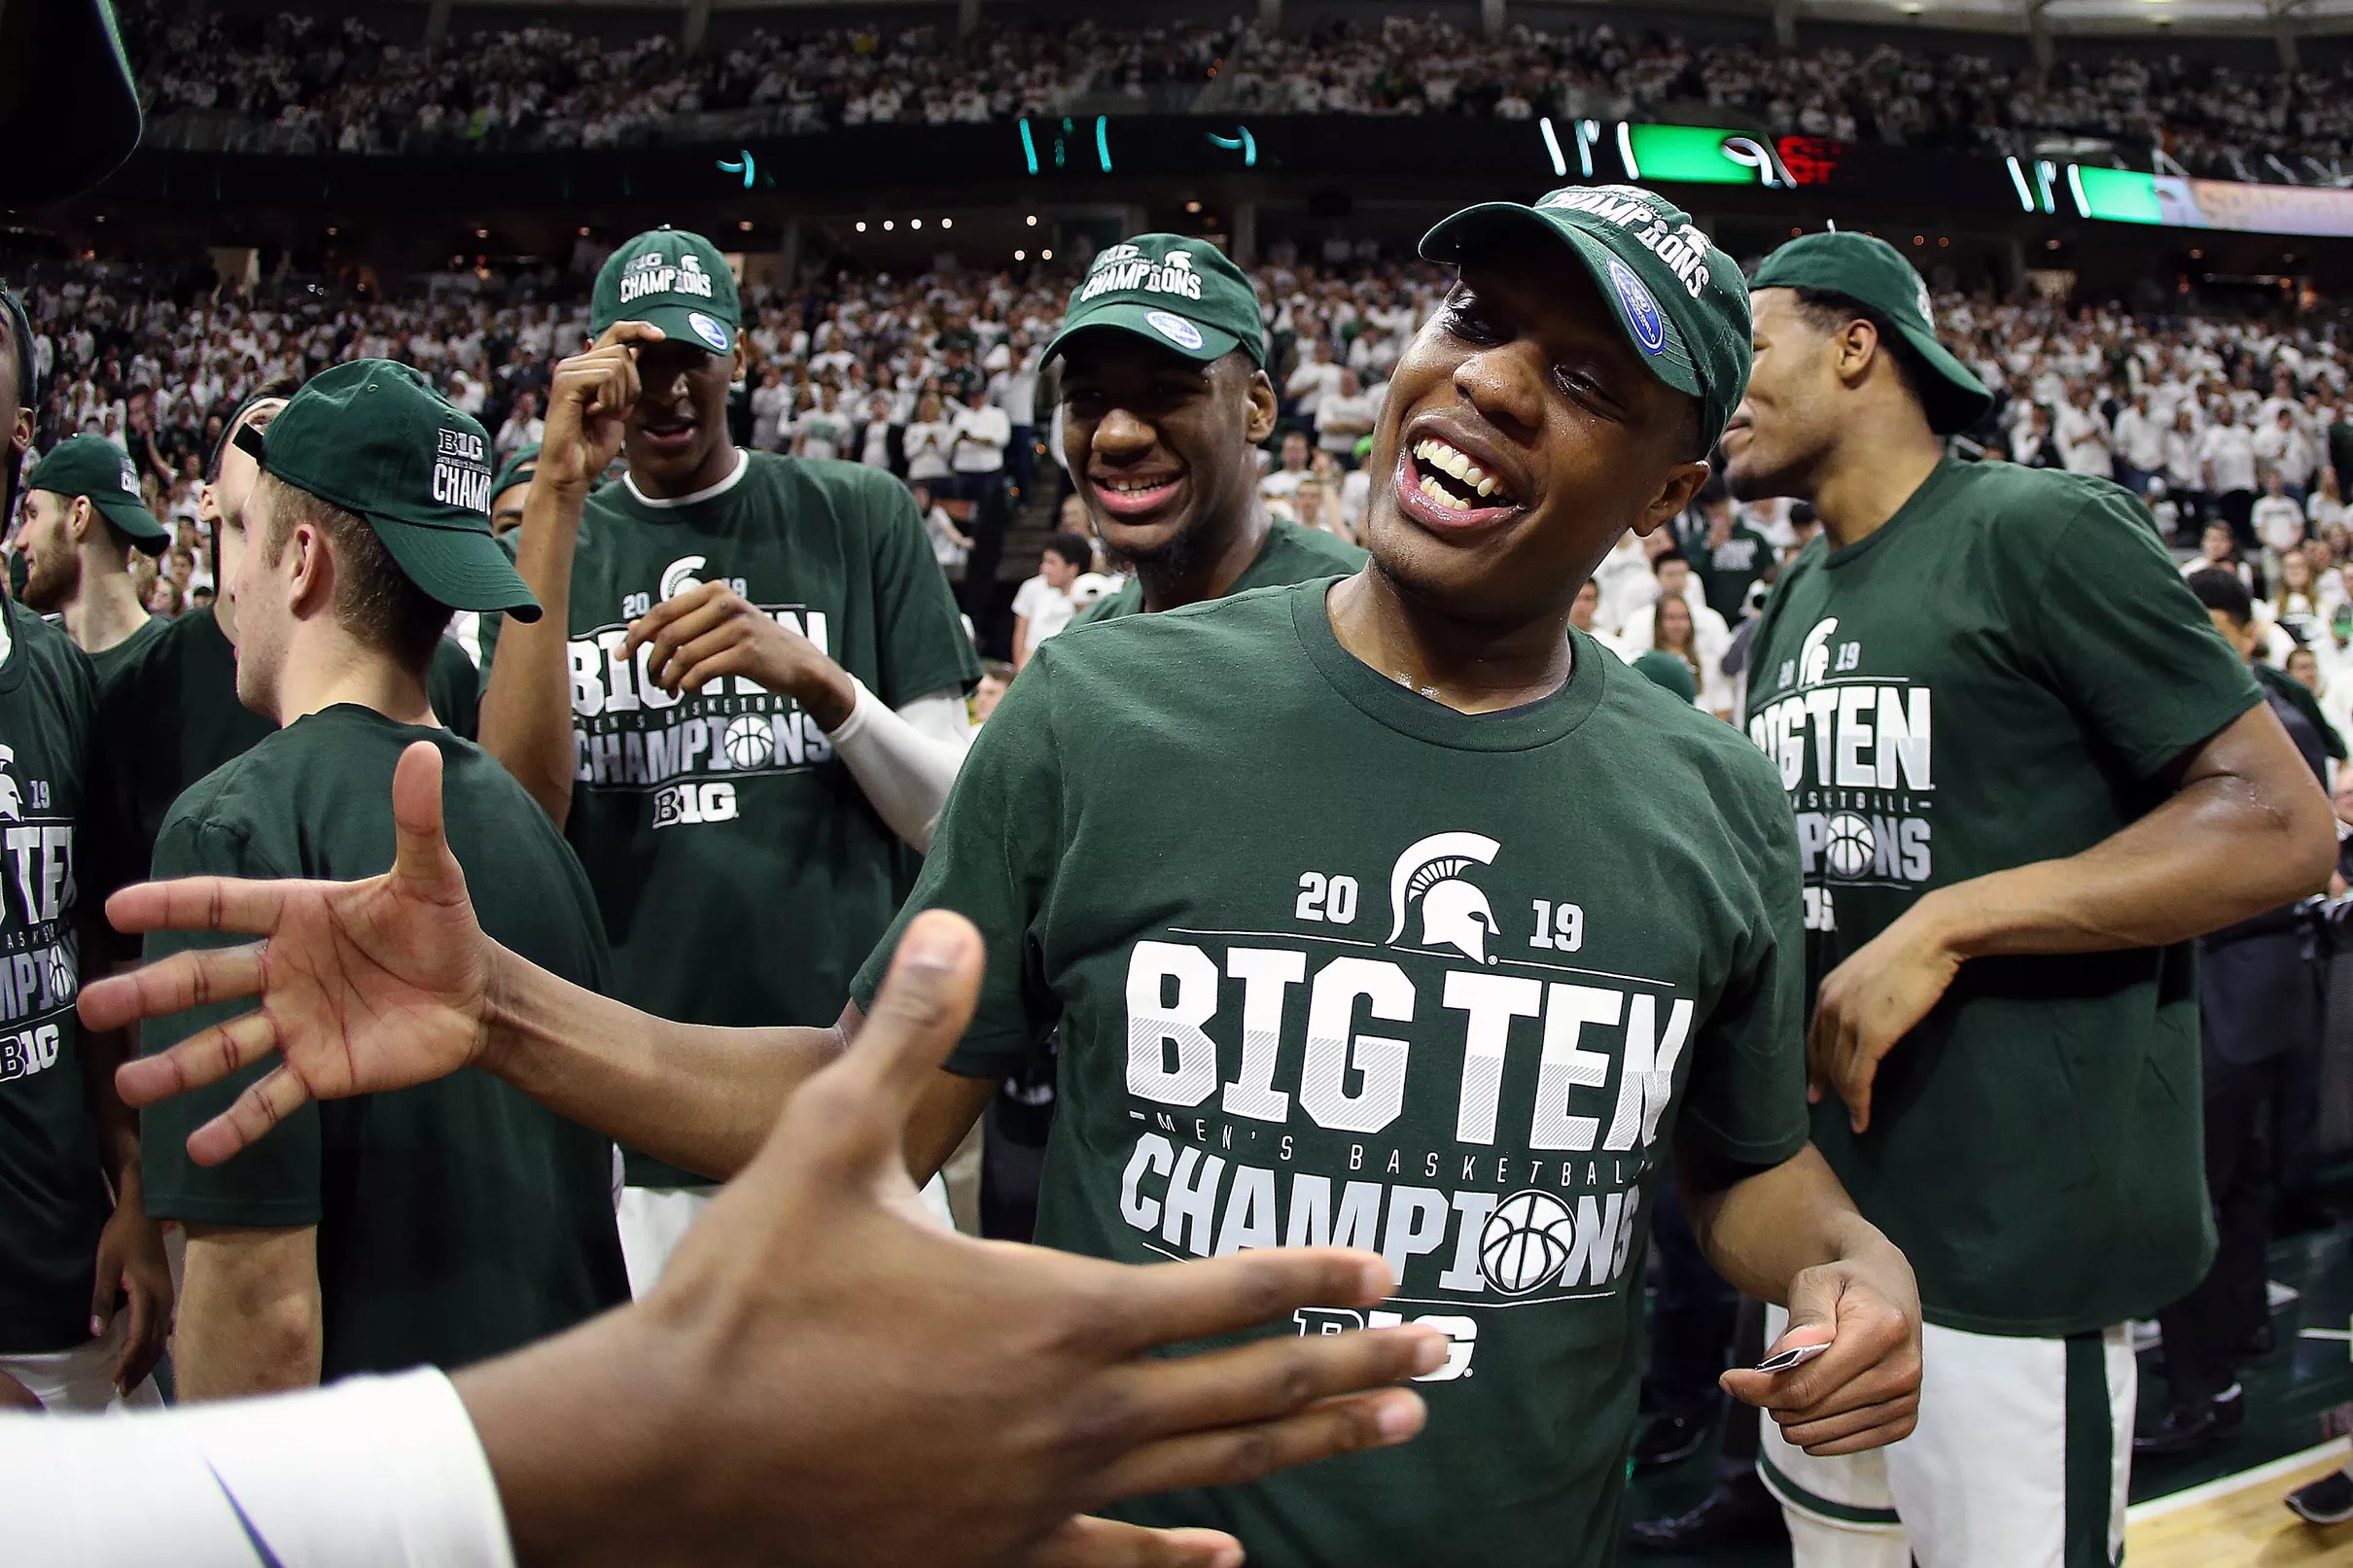 Cassius Winston wins Big Ten Player of the Year